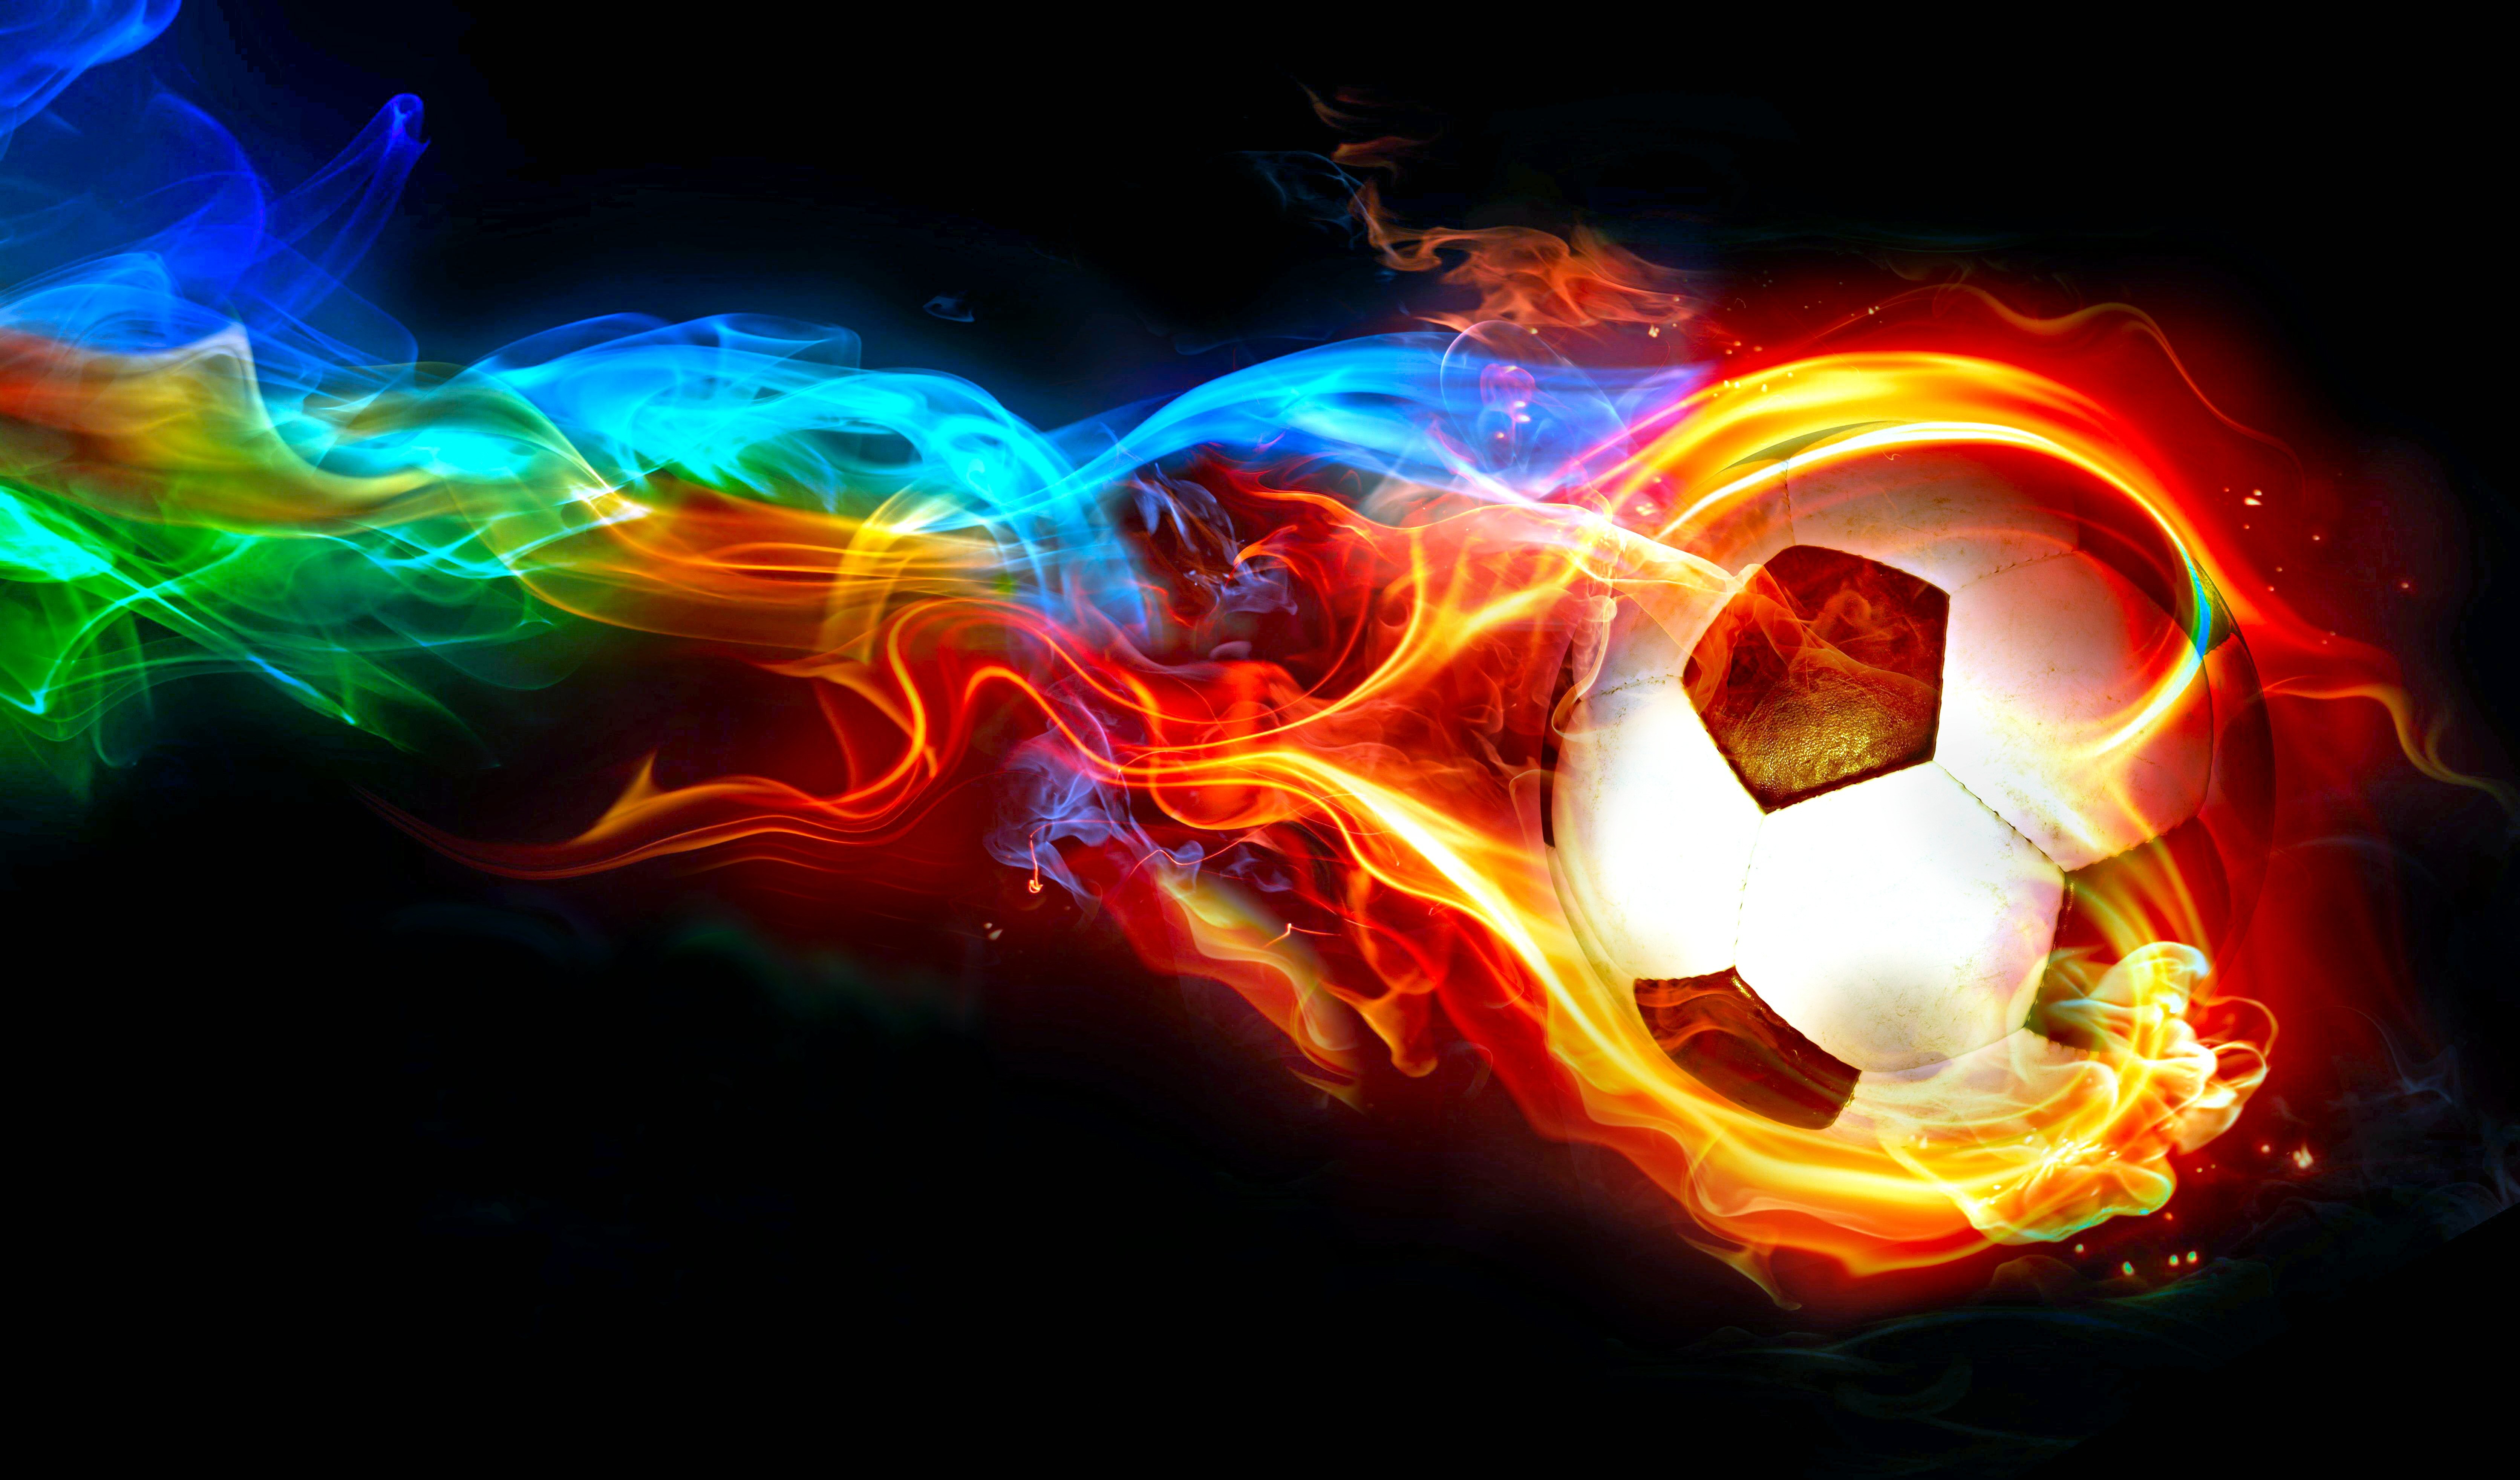 A soccer ball in a fiery abstraction